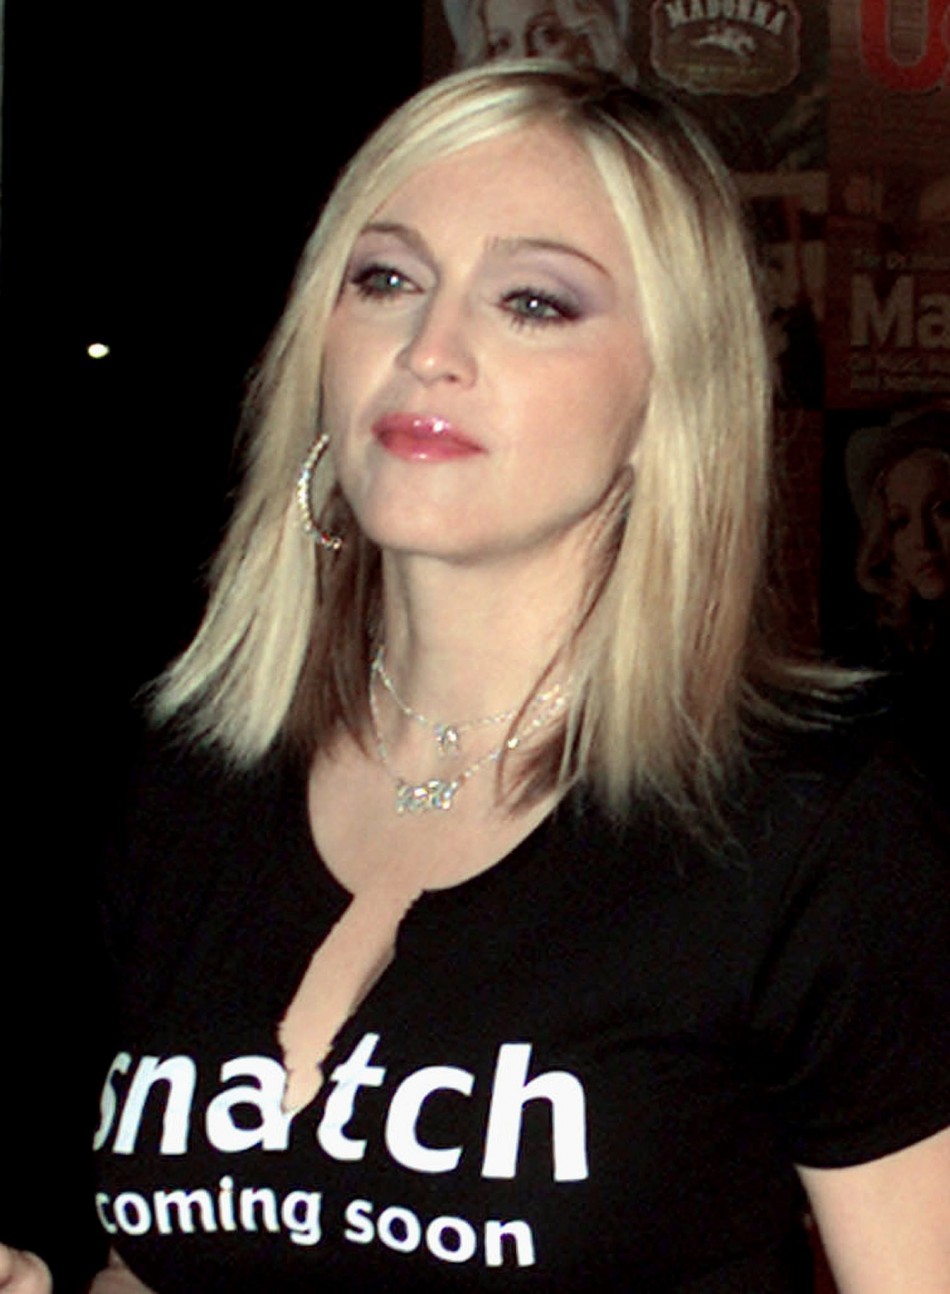 U.S. pop superstar Madonna officially announced on November 8, 2000 that she will perform her first British concert in seven years at Londons Brixton Academy. The November 28, 2000 performance will be for a specially invited audience only. Madonna is pic